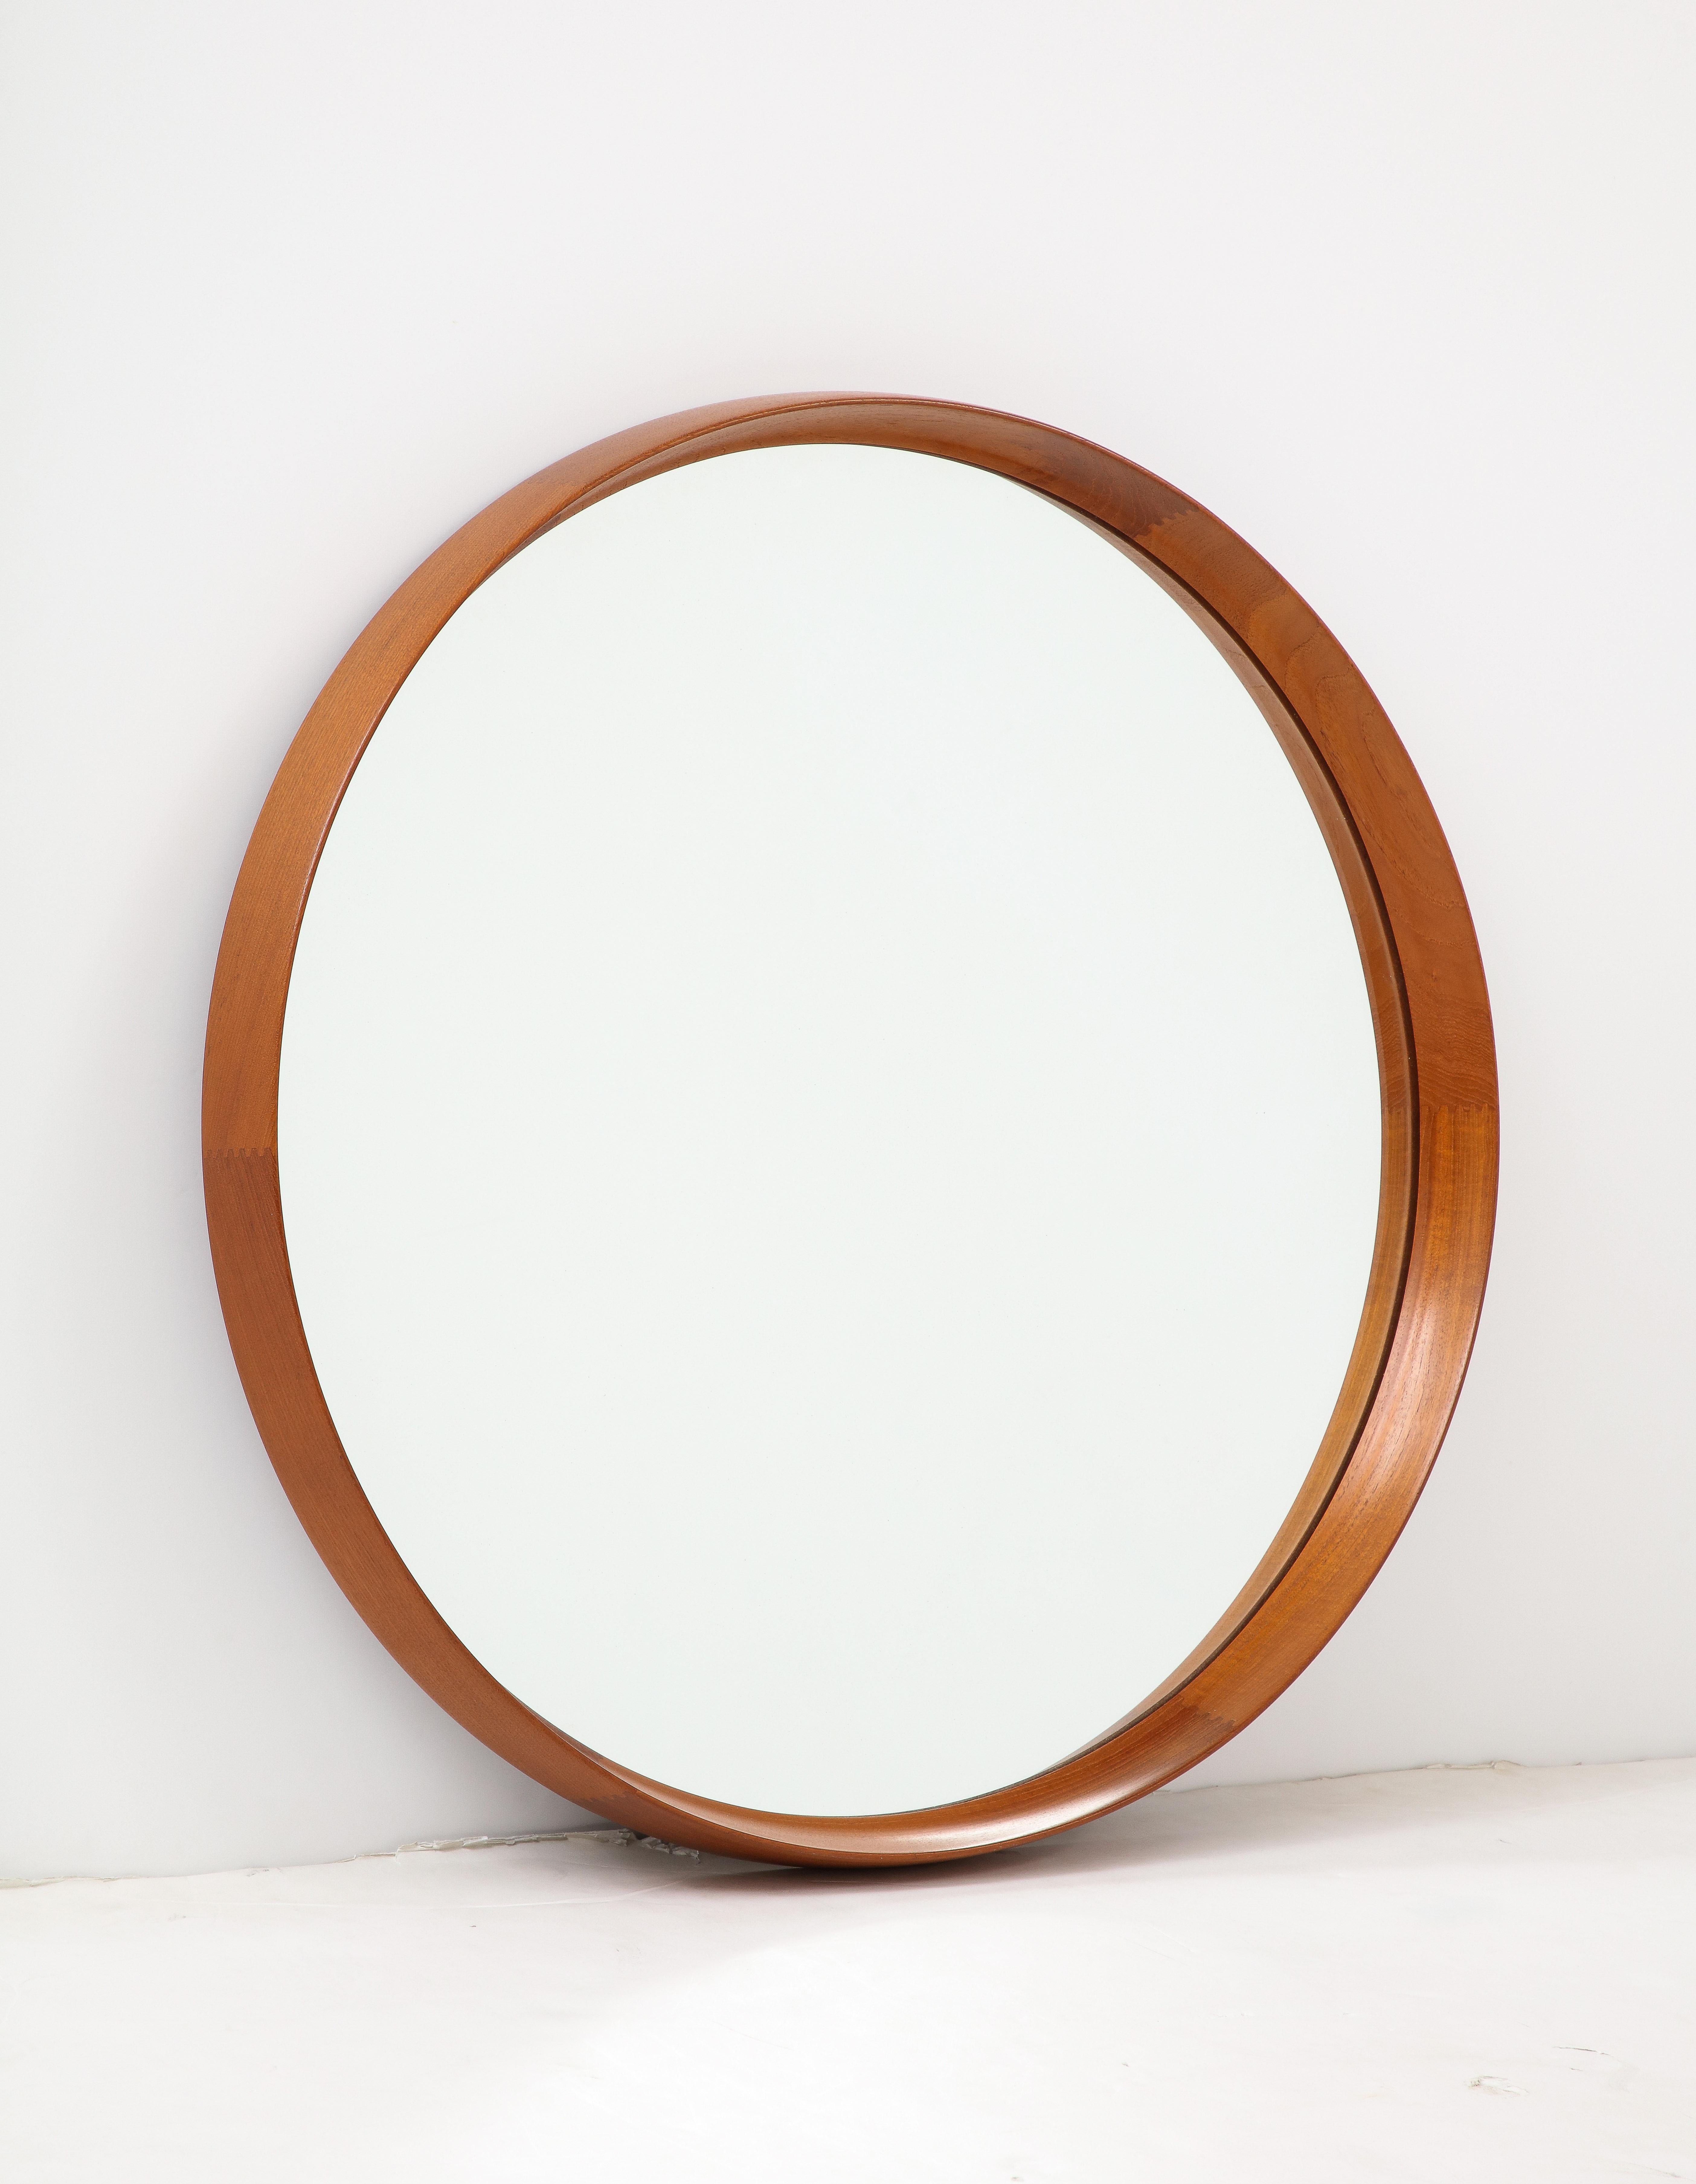 Scandinavian round teak wall mirror by Uno & Osten Kristiansson for Luxus, Sweden. High quality design and execution with finger joint construction in a sculpted frame. Ready to install.